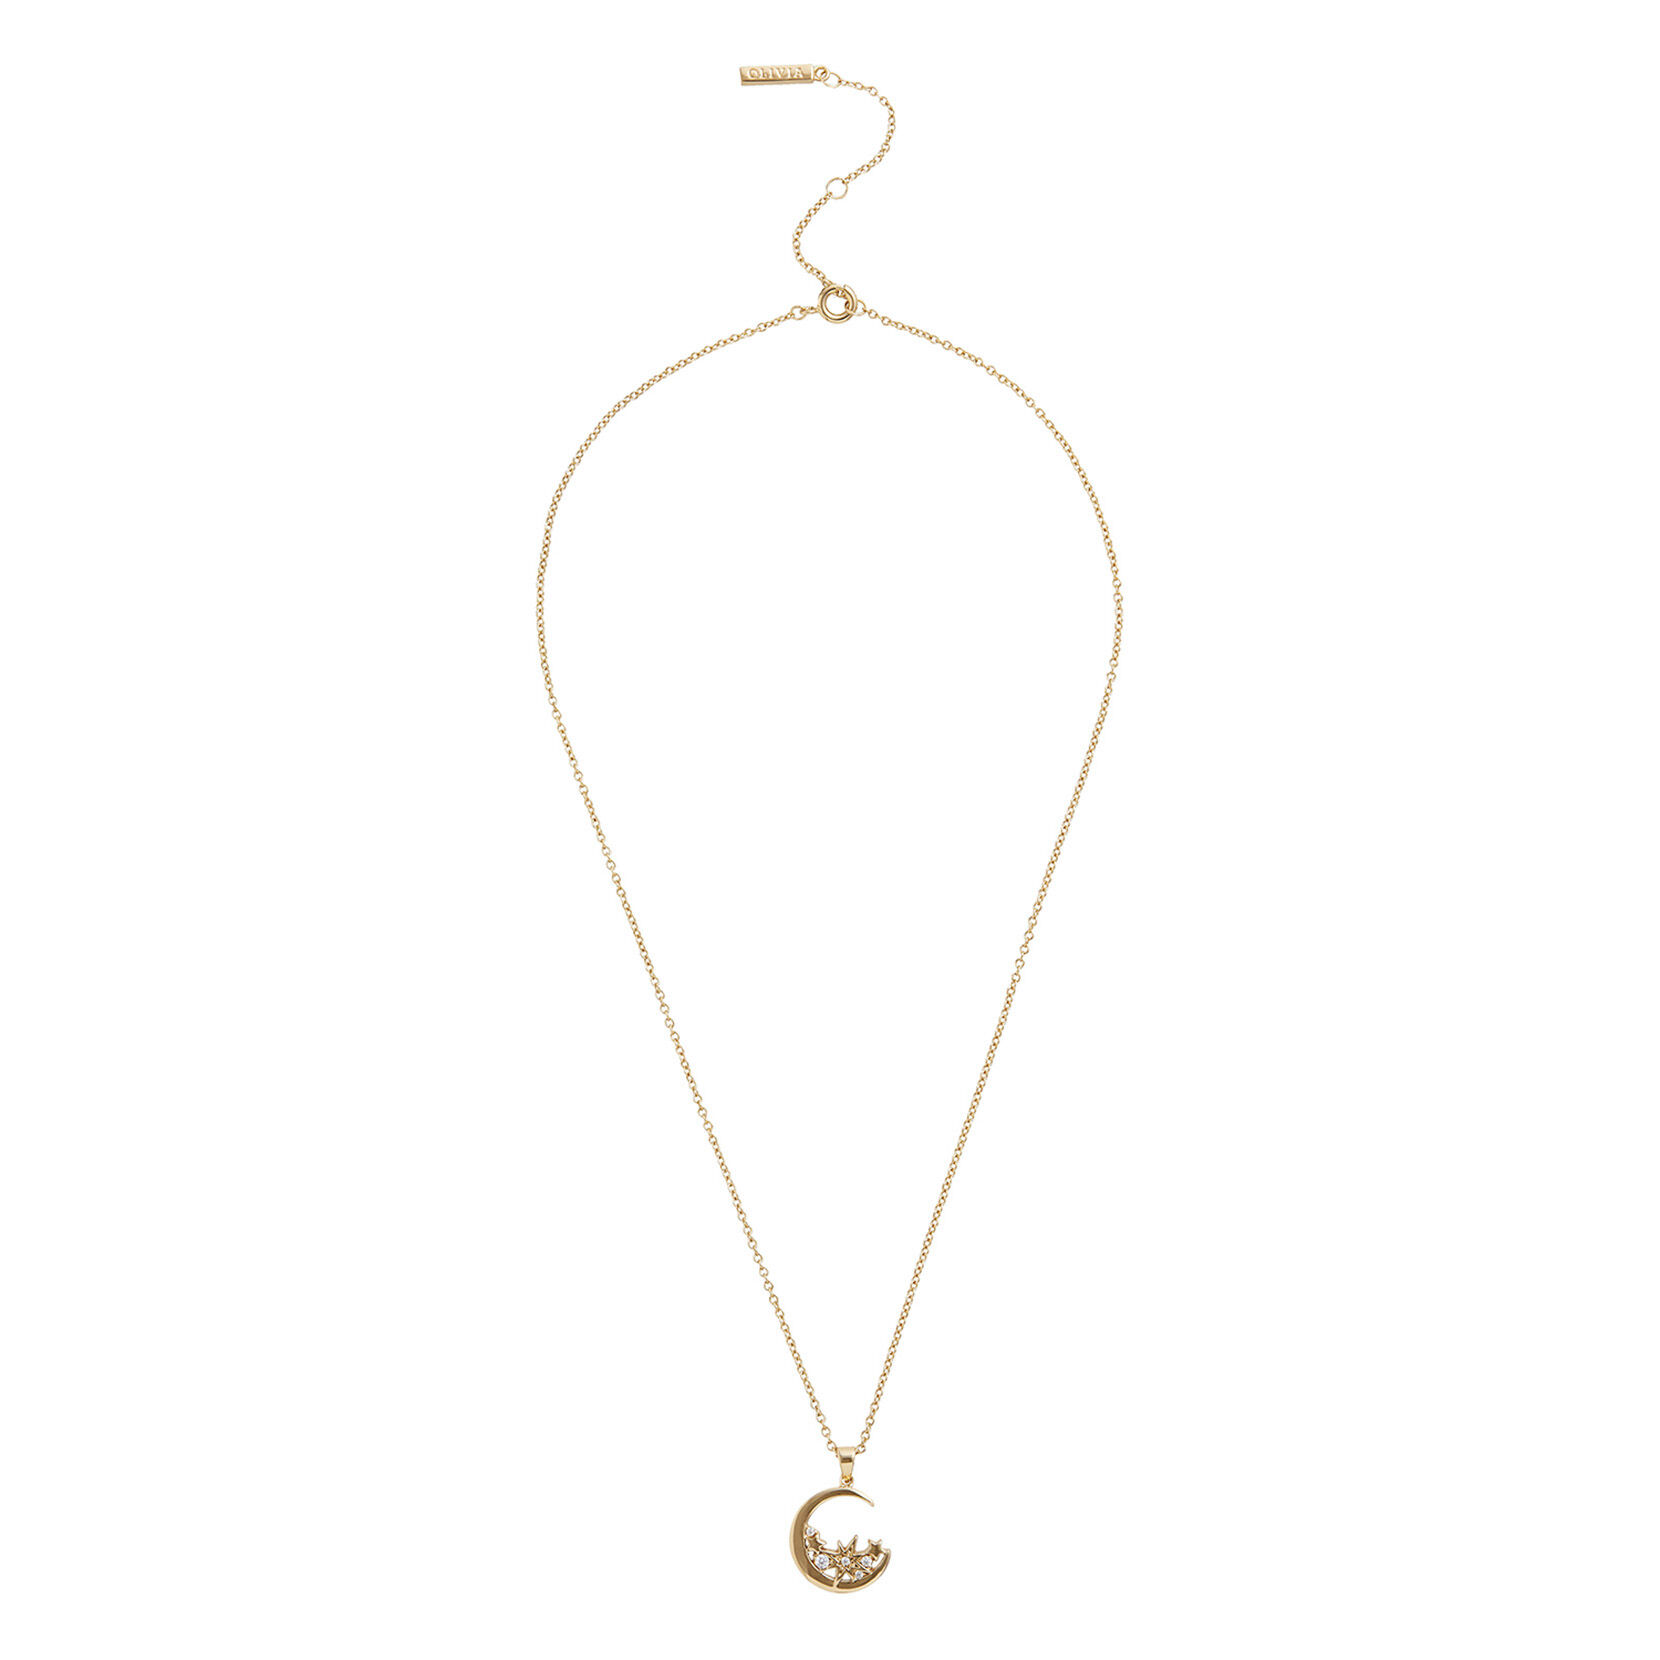 Celestial Gold Moon Necklace